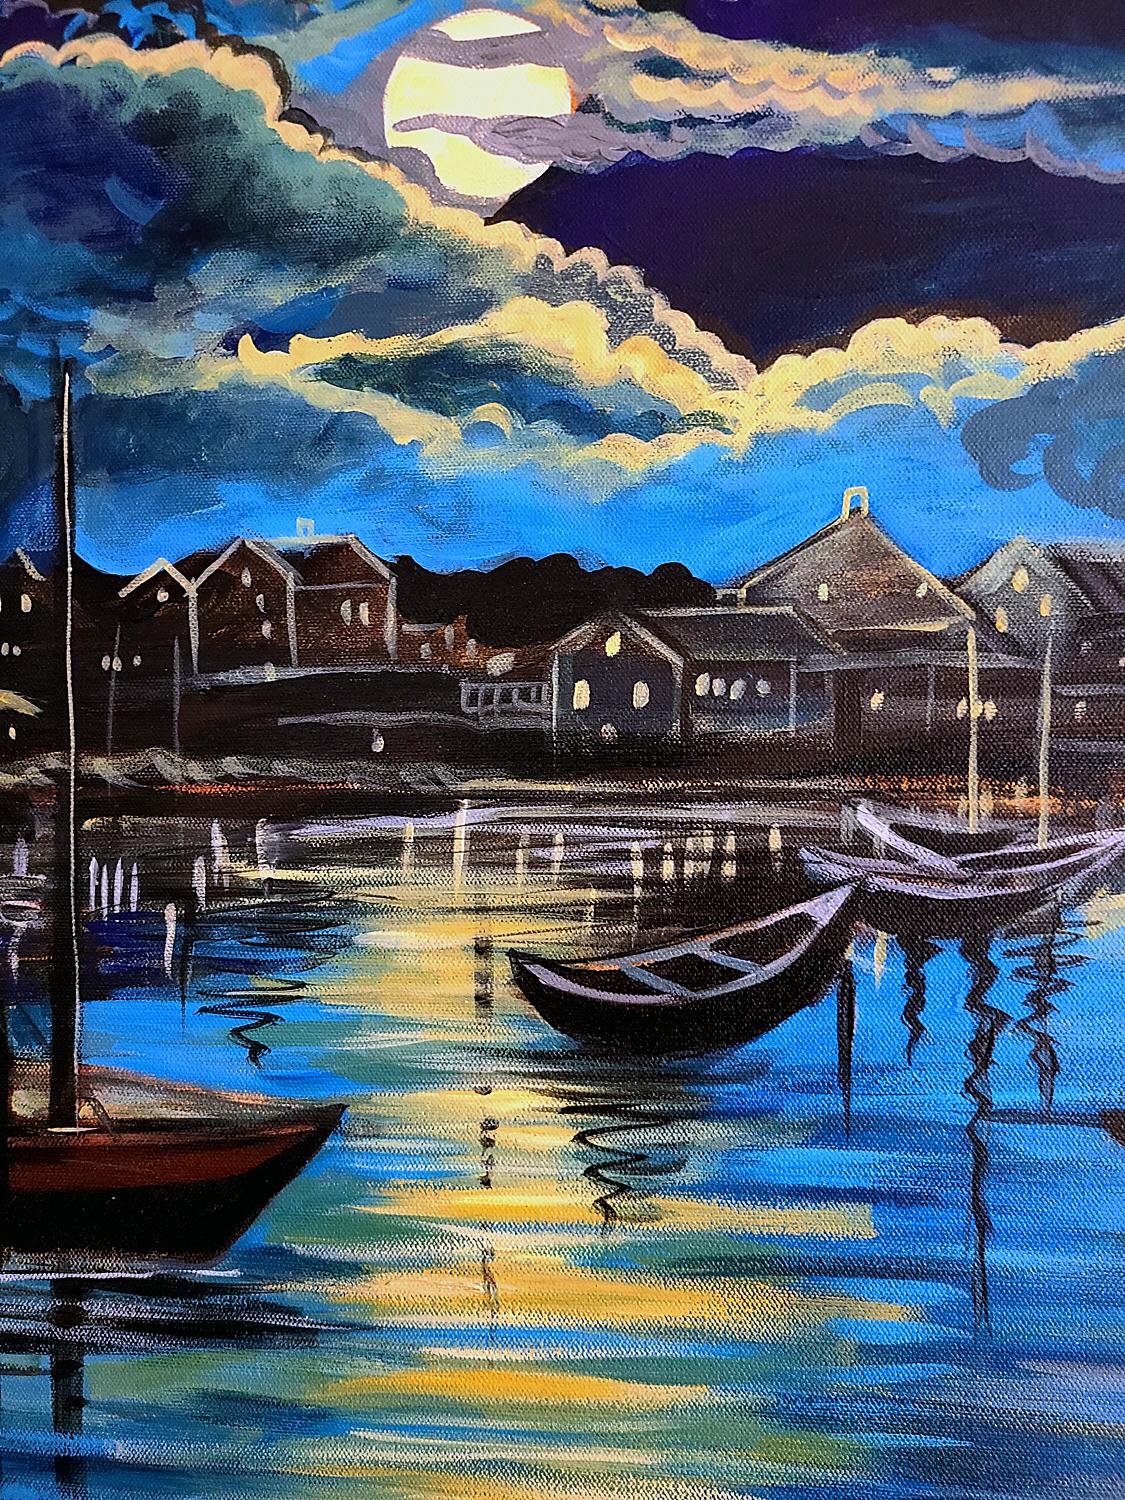 <p>Artist Comments<br>Artist Kira Yustak reveals a primitive seascape of the New Jersey docks during a breezy and relaxed evening. She paints a scene of boats gently drifting by the water under the gleaming moonlight. The iridescent lunar glow